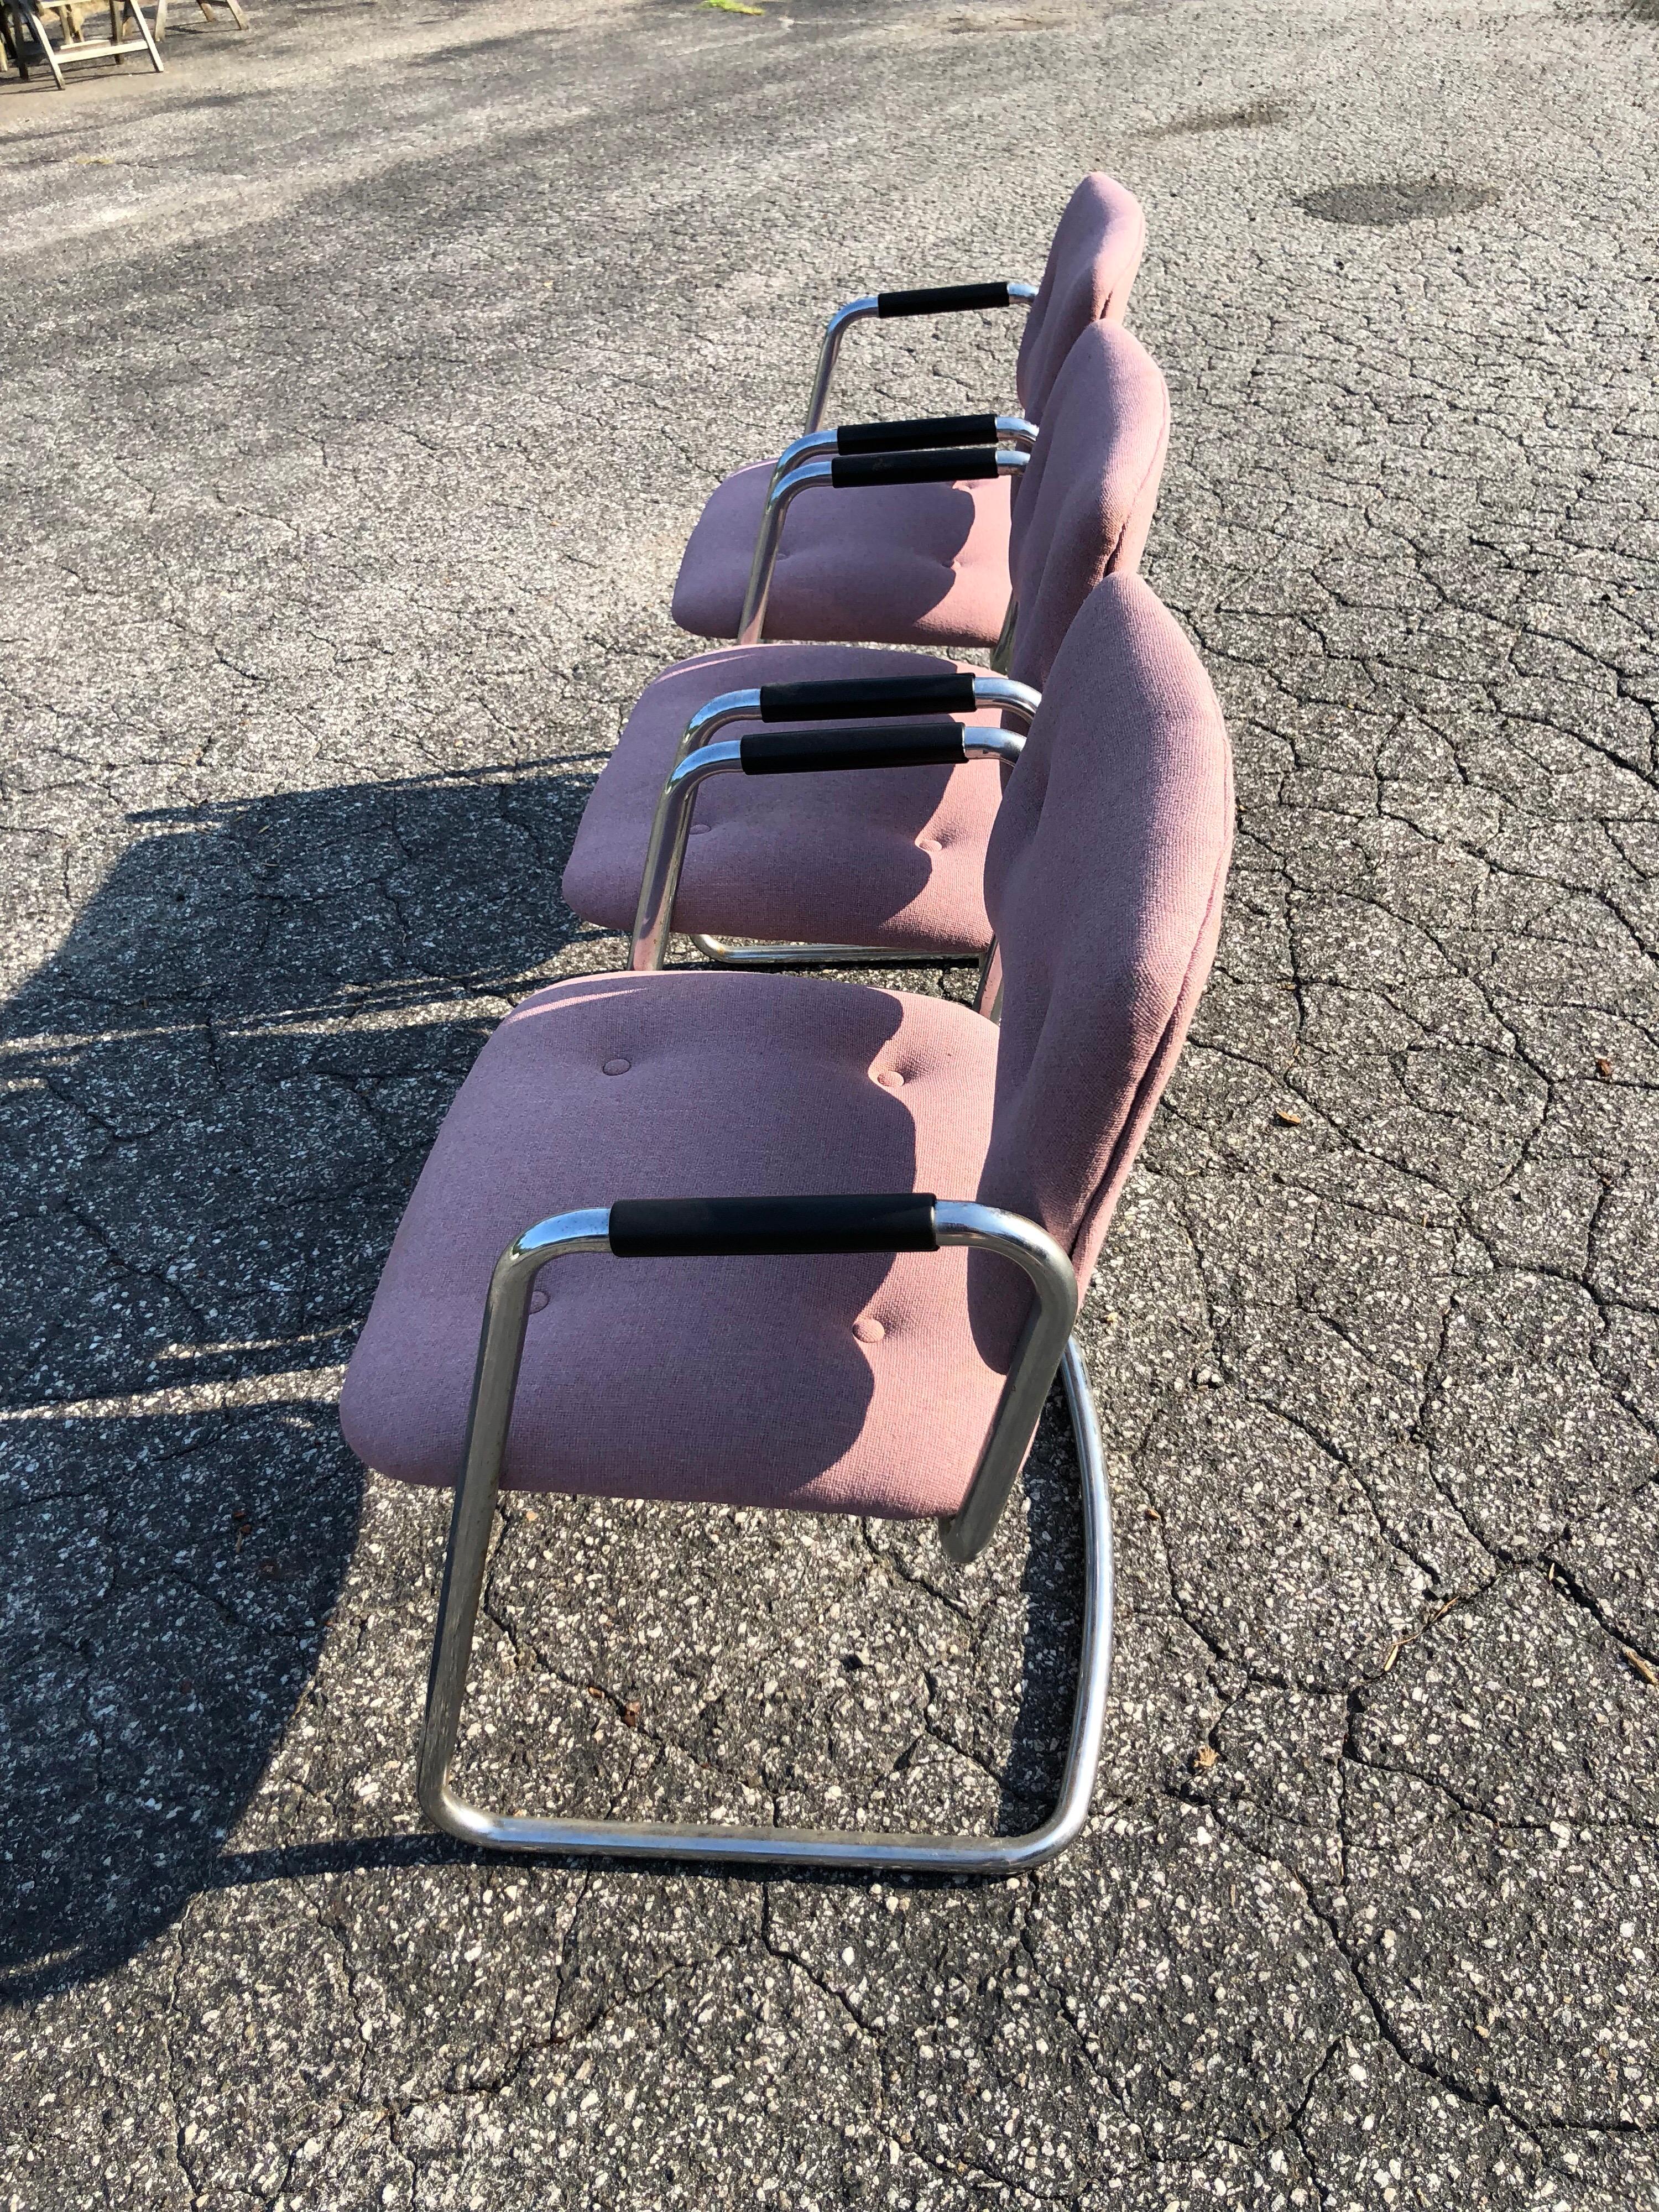 Set of Three Chrome Steelcase Chairs in Plum 2